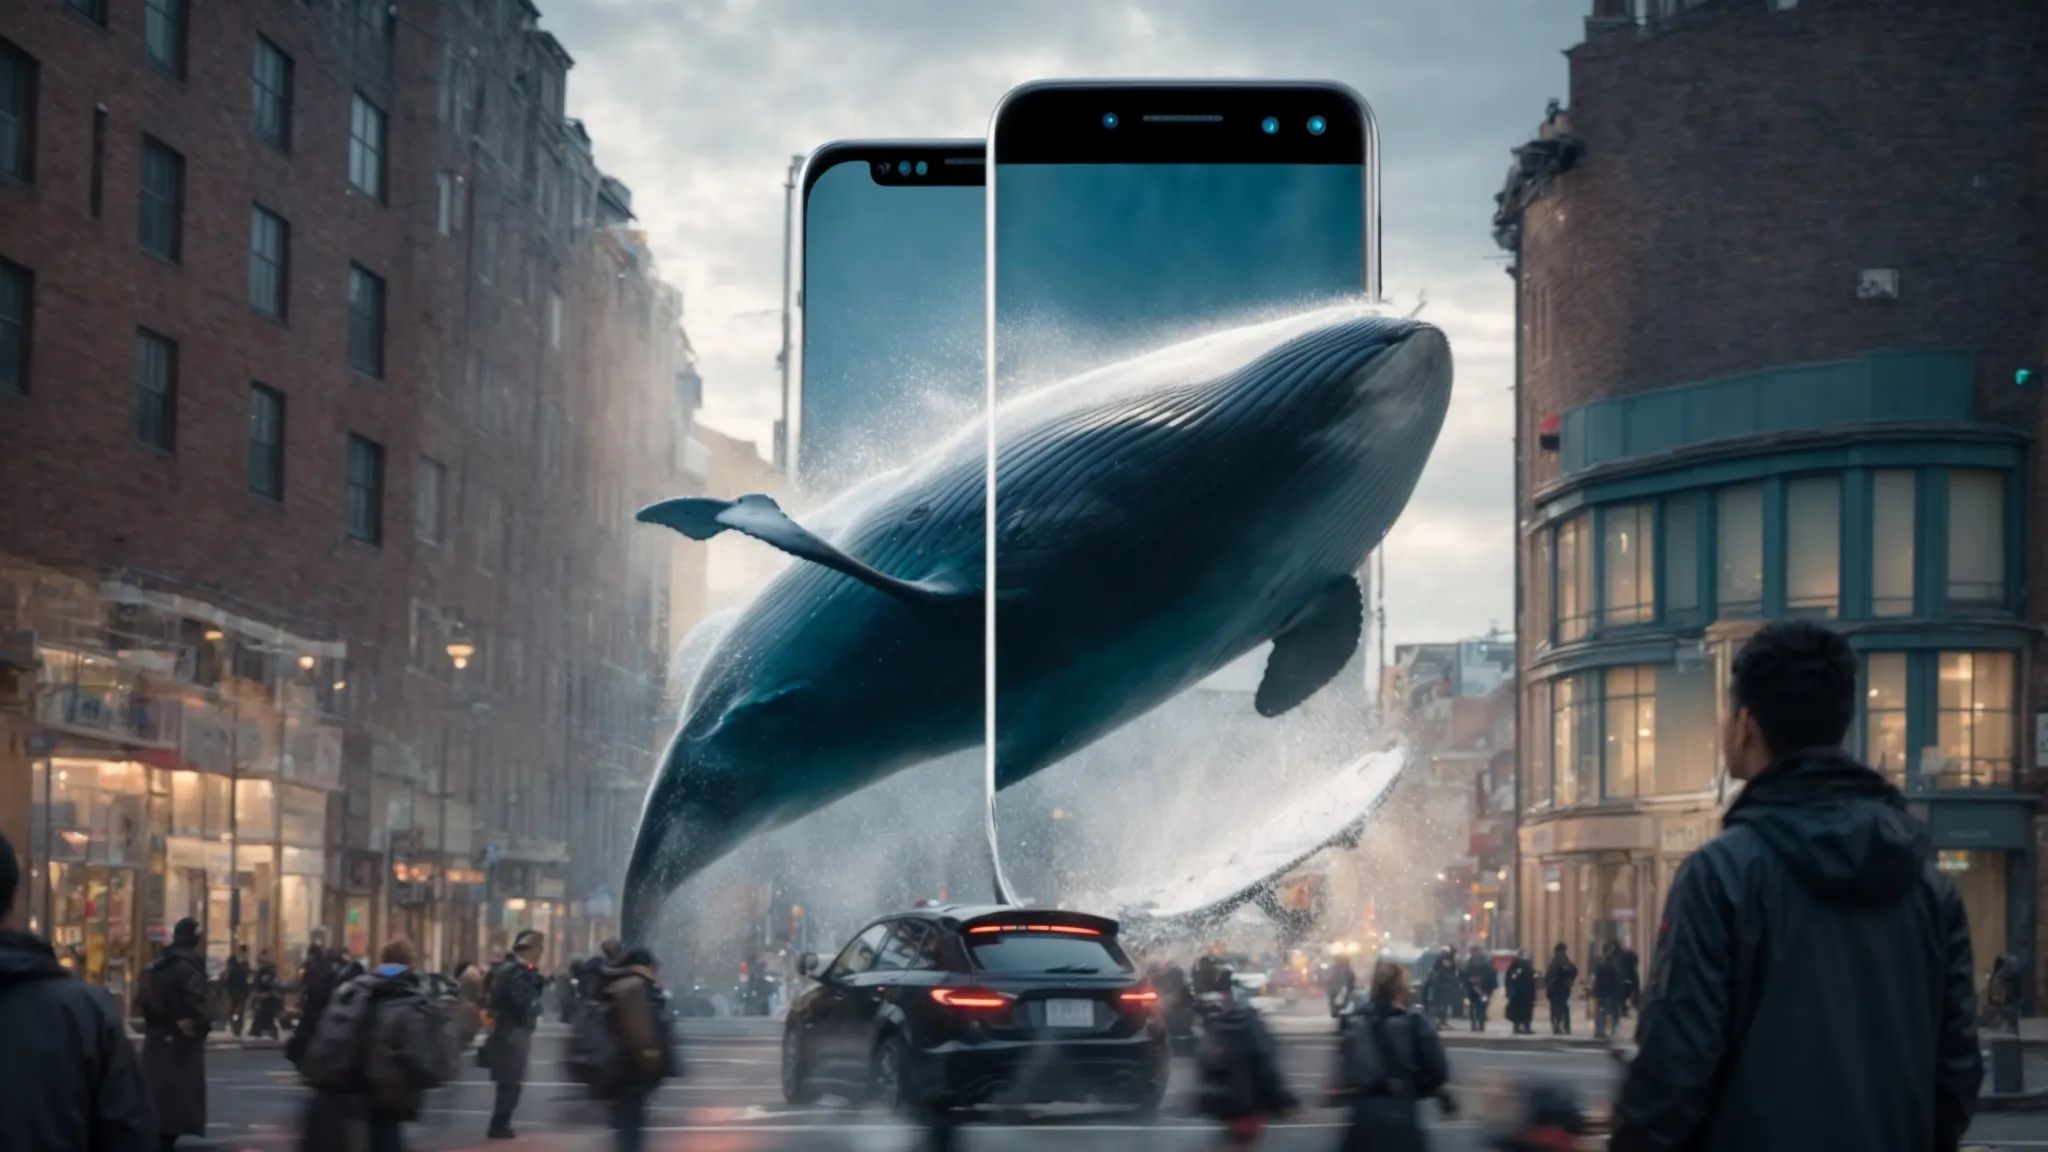 a person watches in awe as a whale leaps out of a virtual ocean projected onto a city street through their smartphone screen.